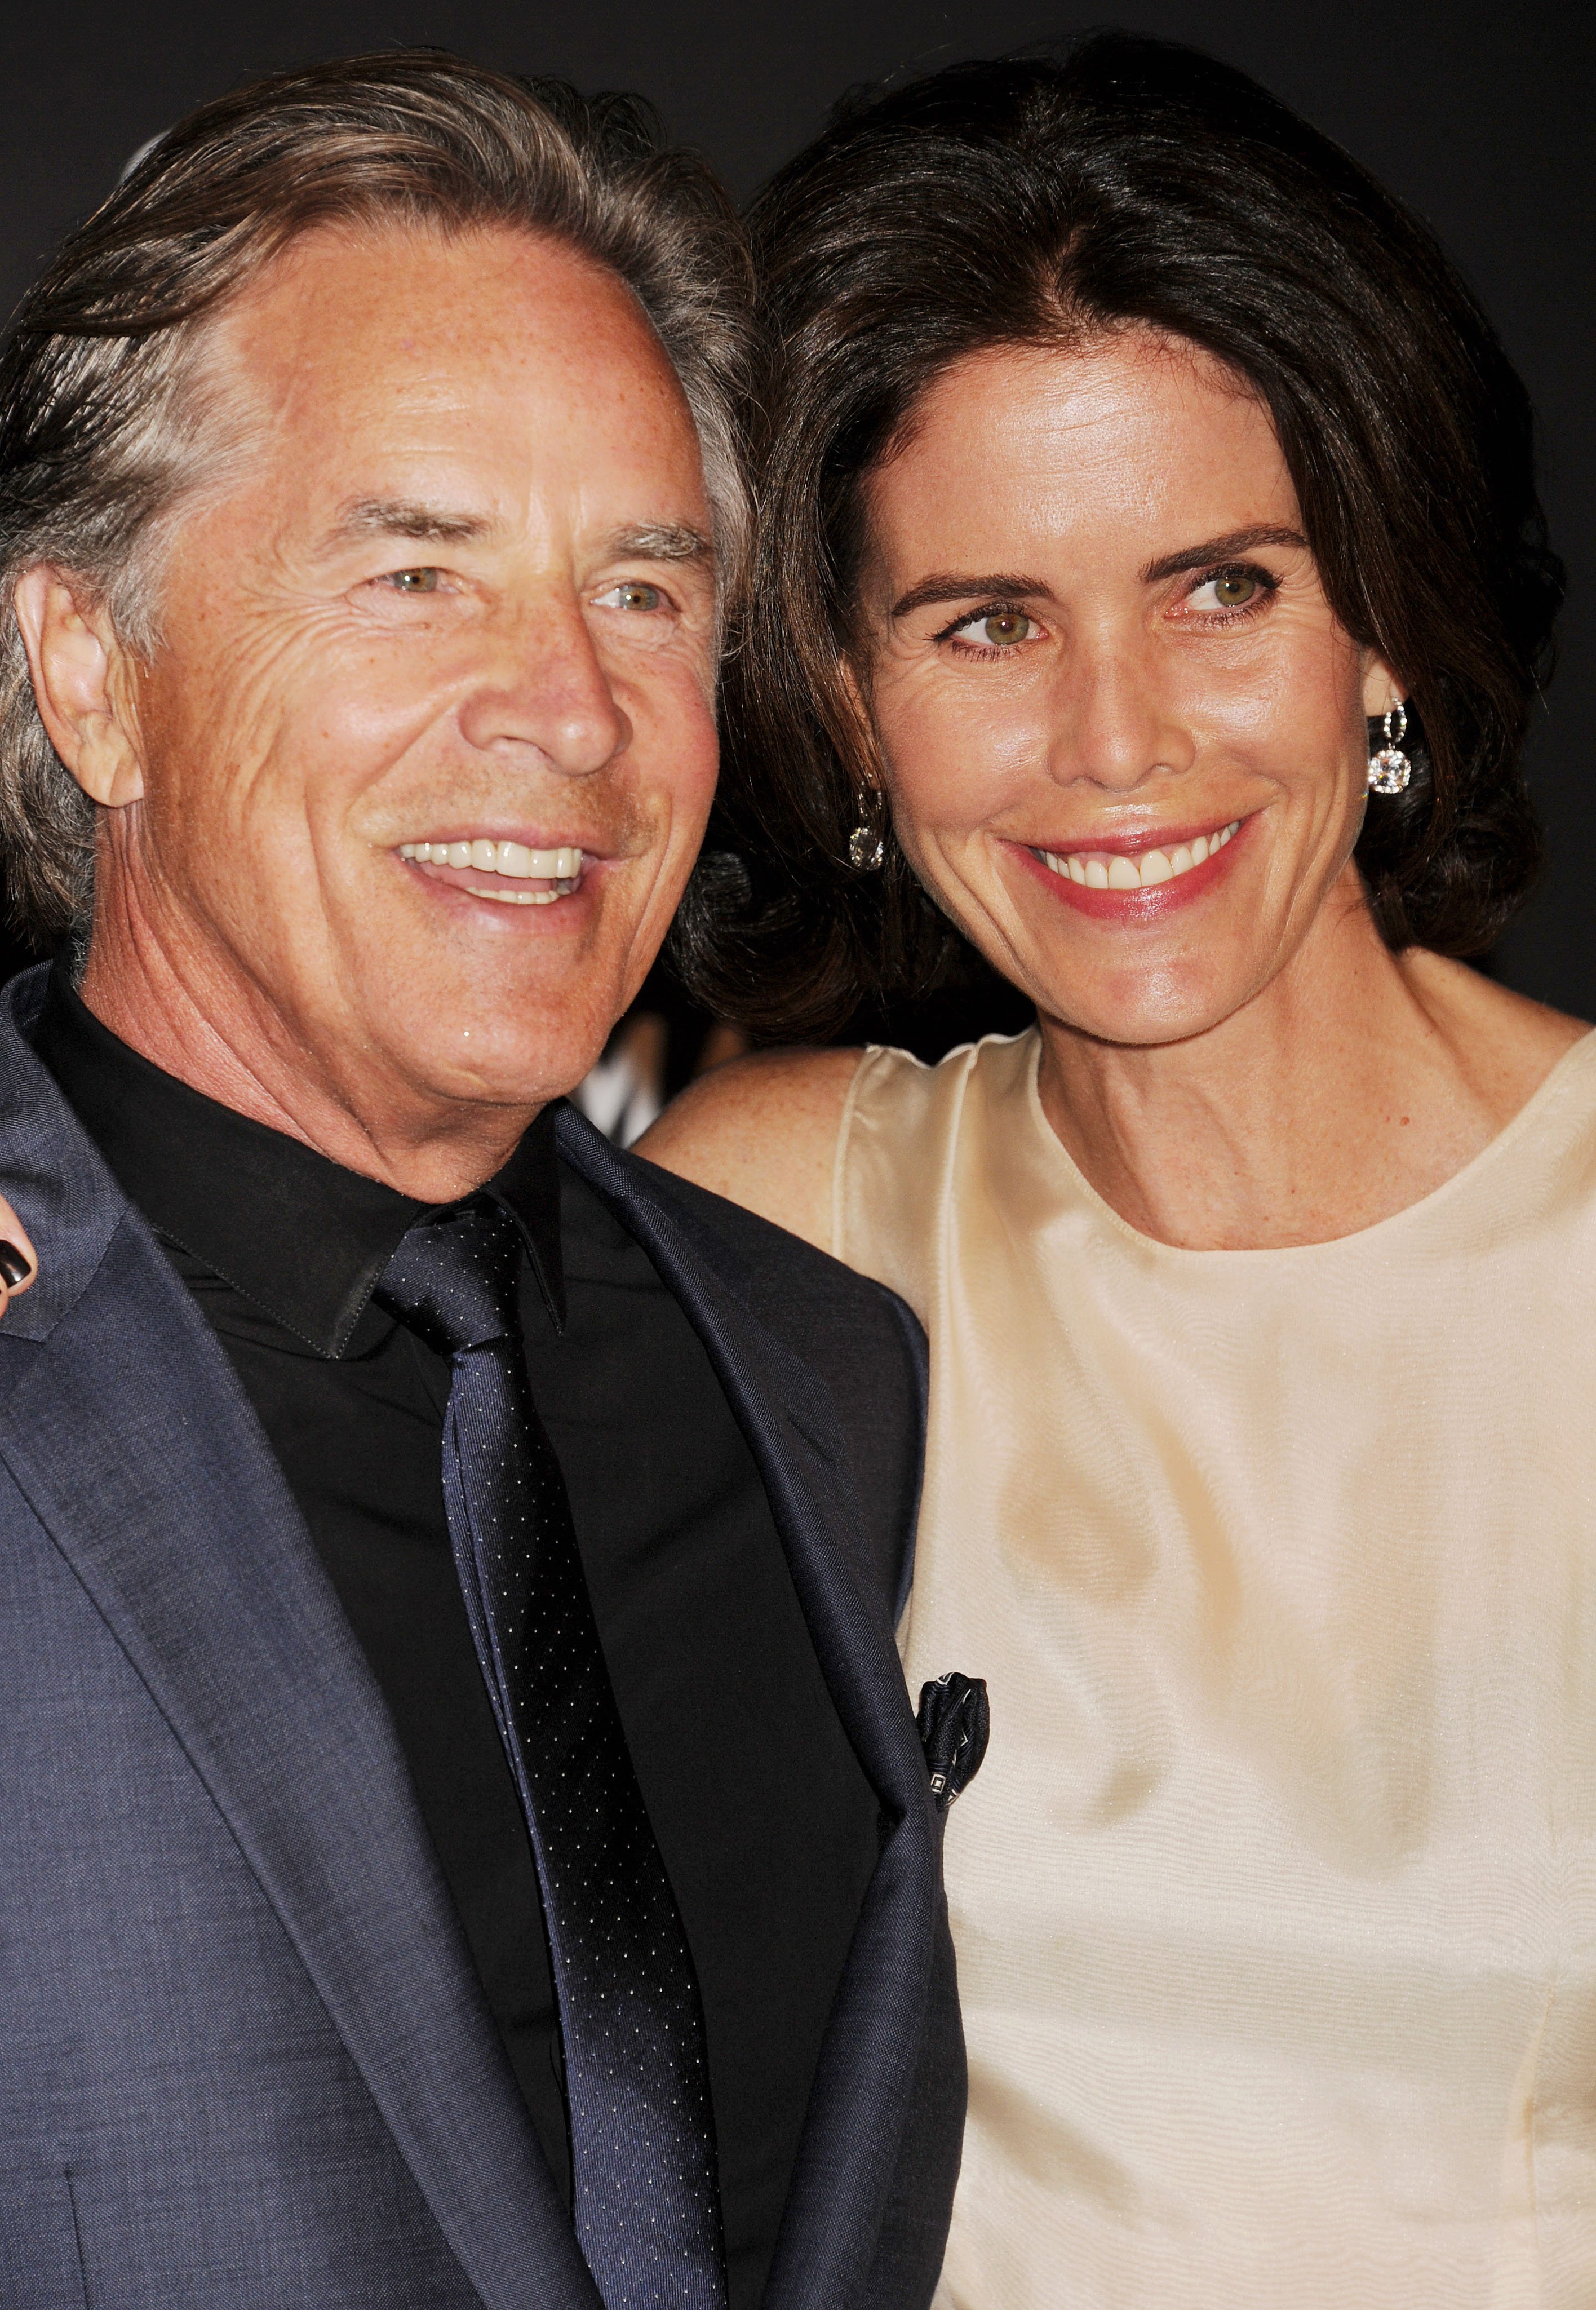 Don Johnson and Kelley Phleger at the LACMA Art + Film Gala honoring Barbara Kruger and Quentin Tarantino on November 1, 2014, in Los Angeles, California | Source: Getty Images